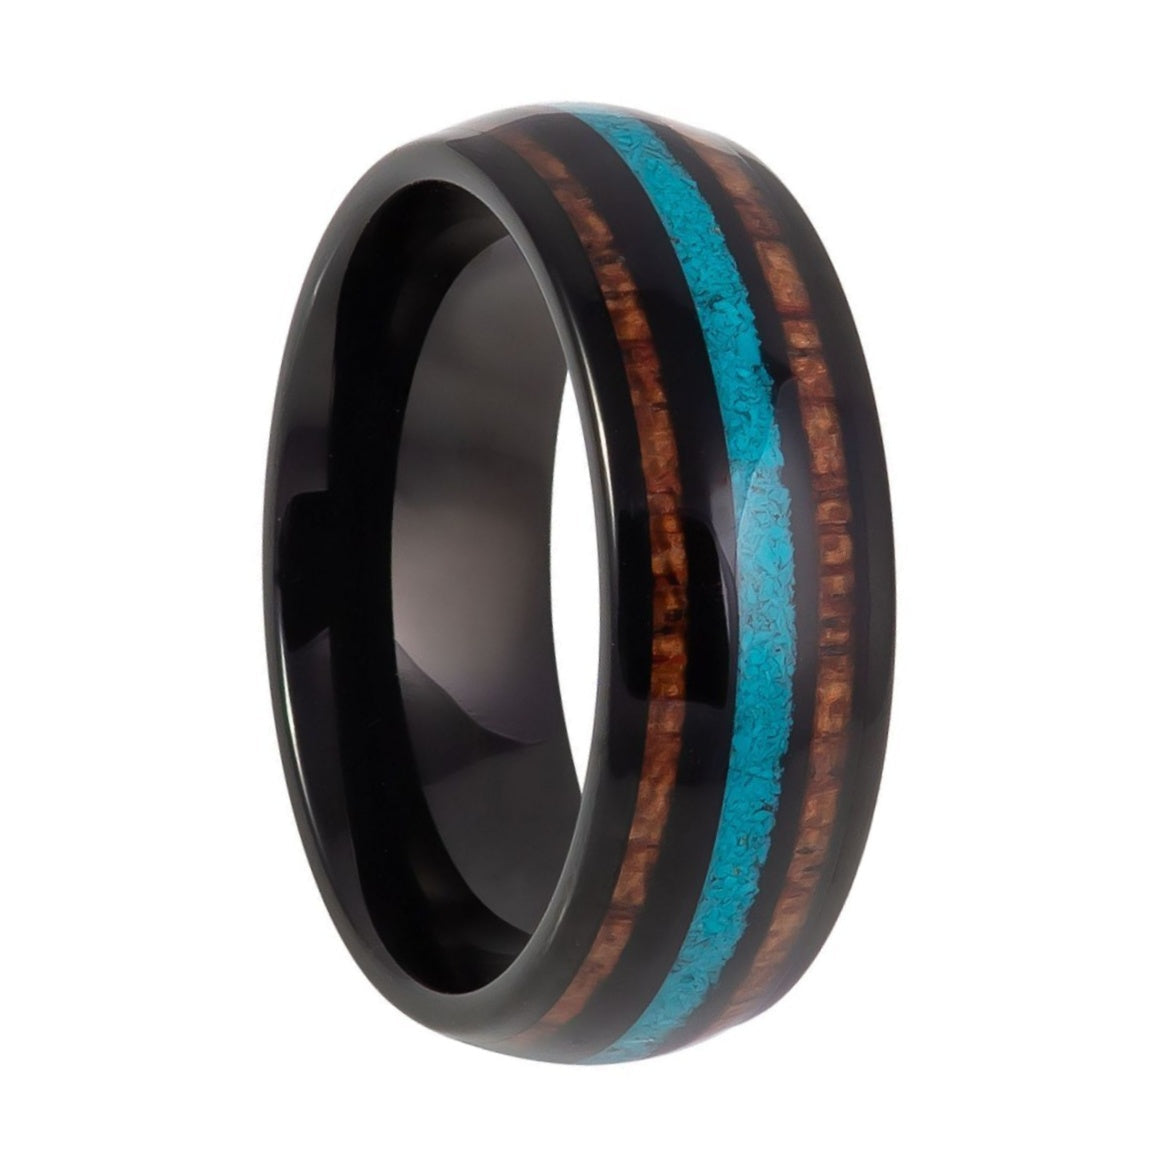 Black Tungsten Men's Wedding Band with Wood & Crushed Stone Inlay